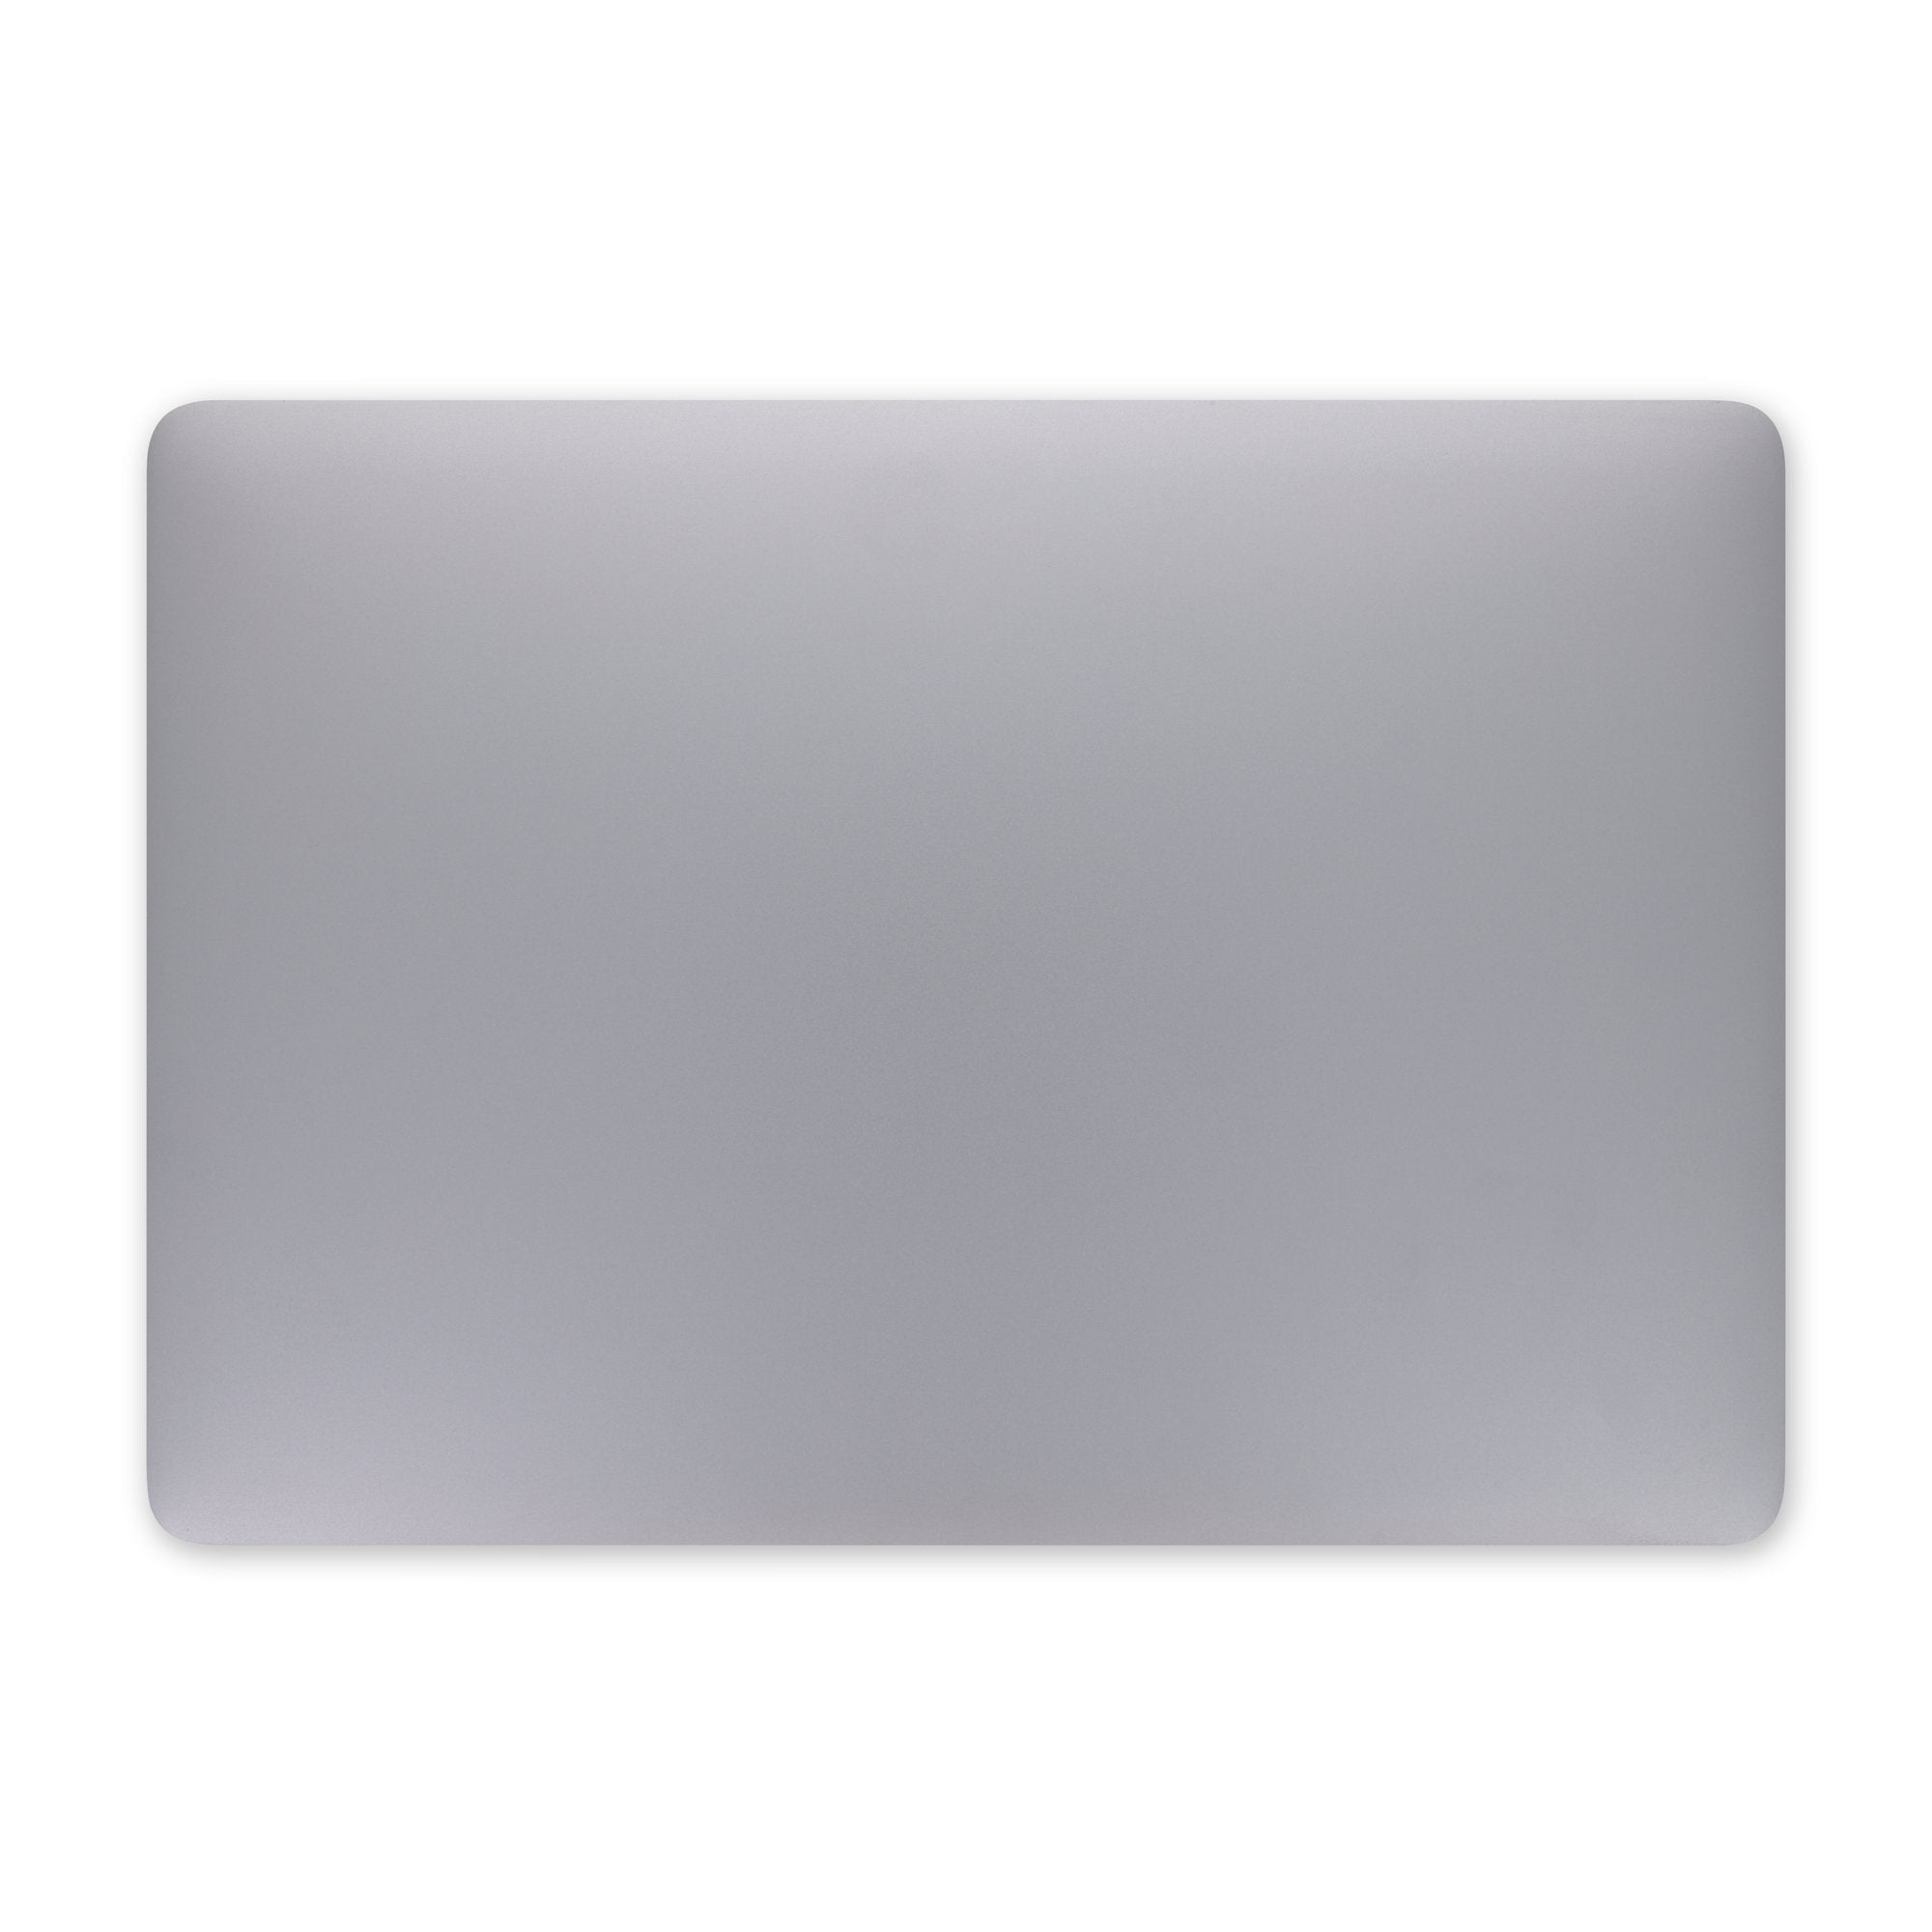 Display Assembly Compatible with MacBook Pro 13" (Late 2016-2017) Dark Gray New